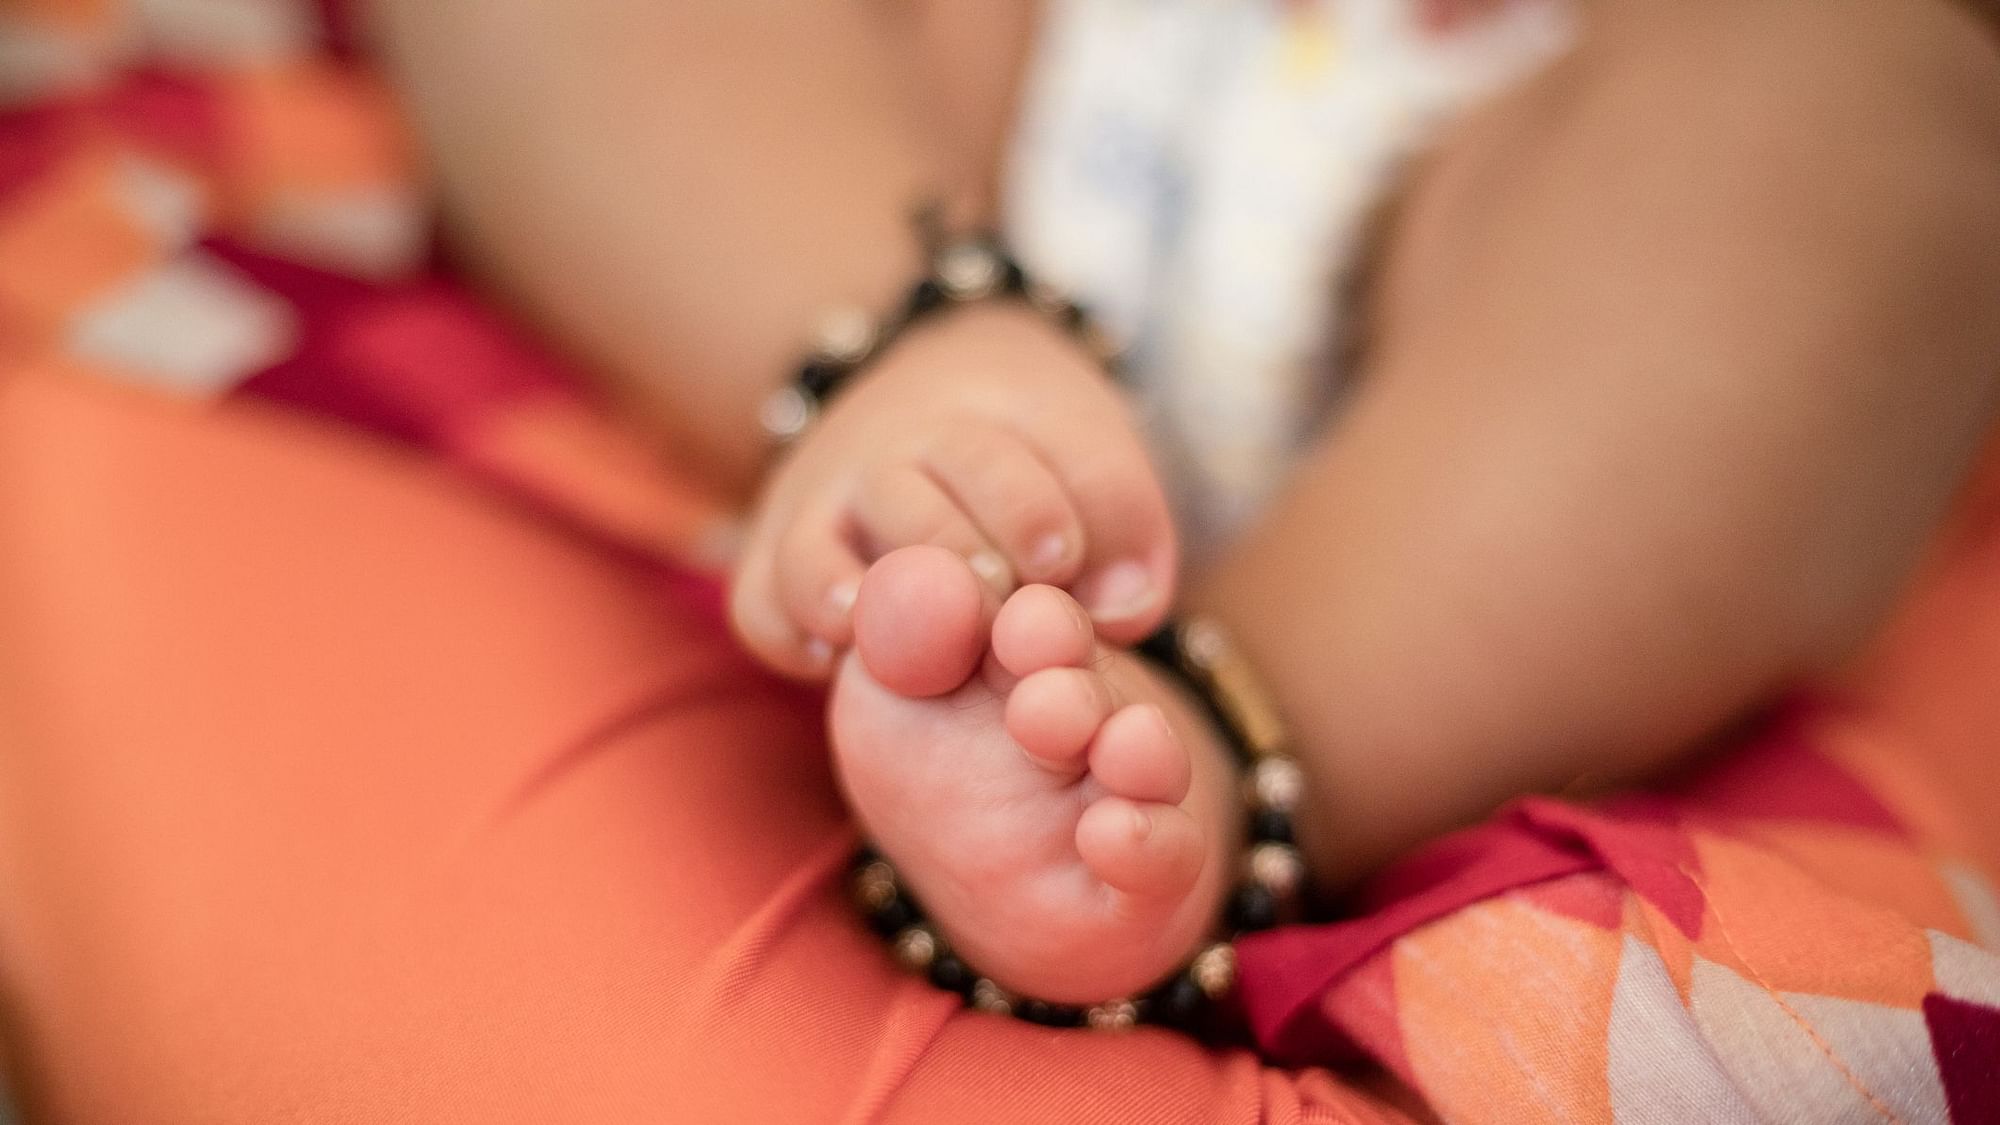 A four-month-old baby who had tested positive for COVID-19, died at Kozhikode Medical College in Kerala.